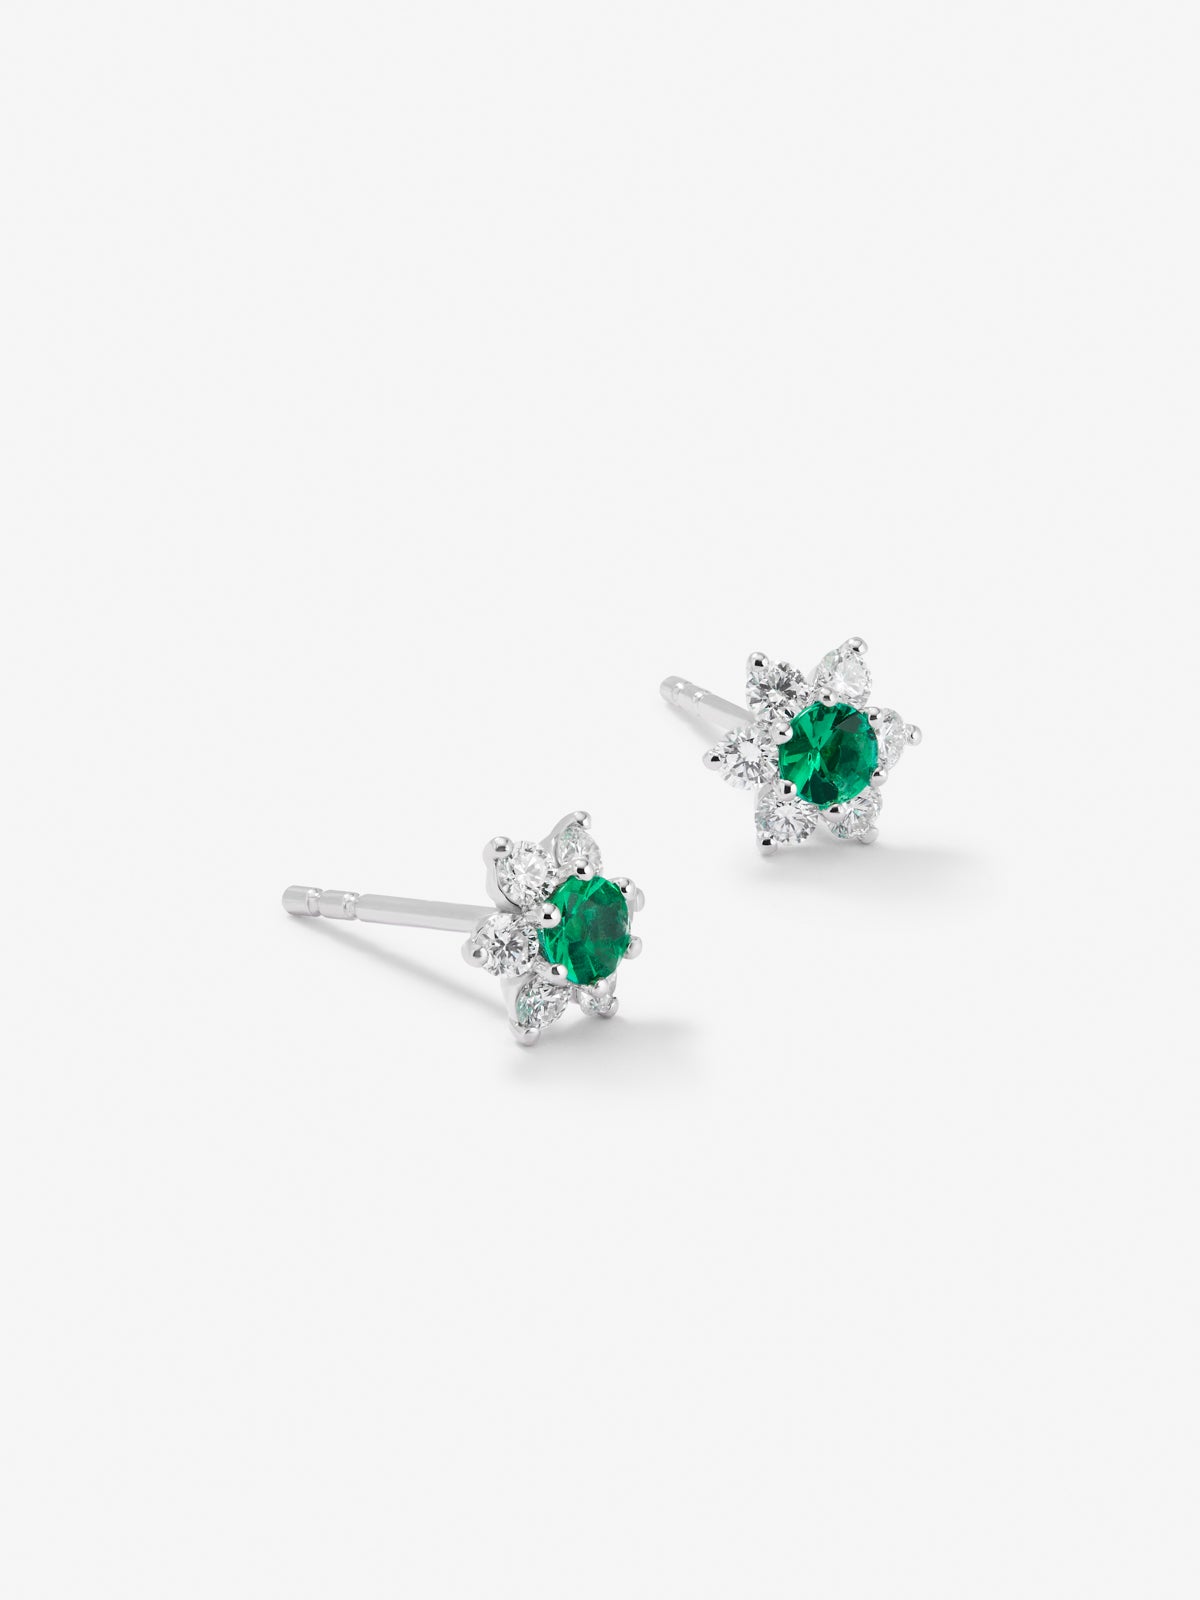 18K white gold earrings with 2 brilliant-cut emeralds with a total of 0.19 cts and 12 brilliant-cut diamonds with a total of 0.28 cts